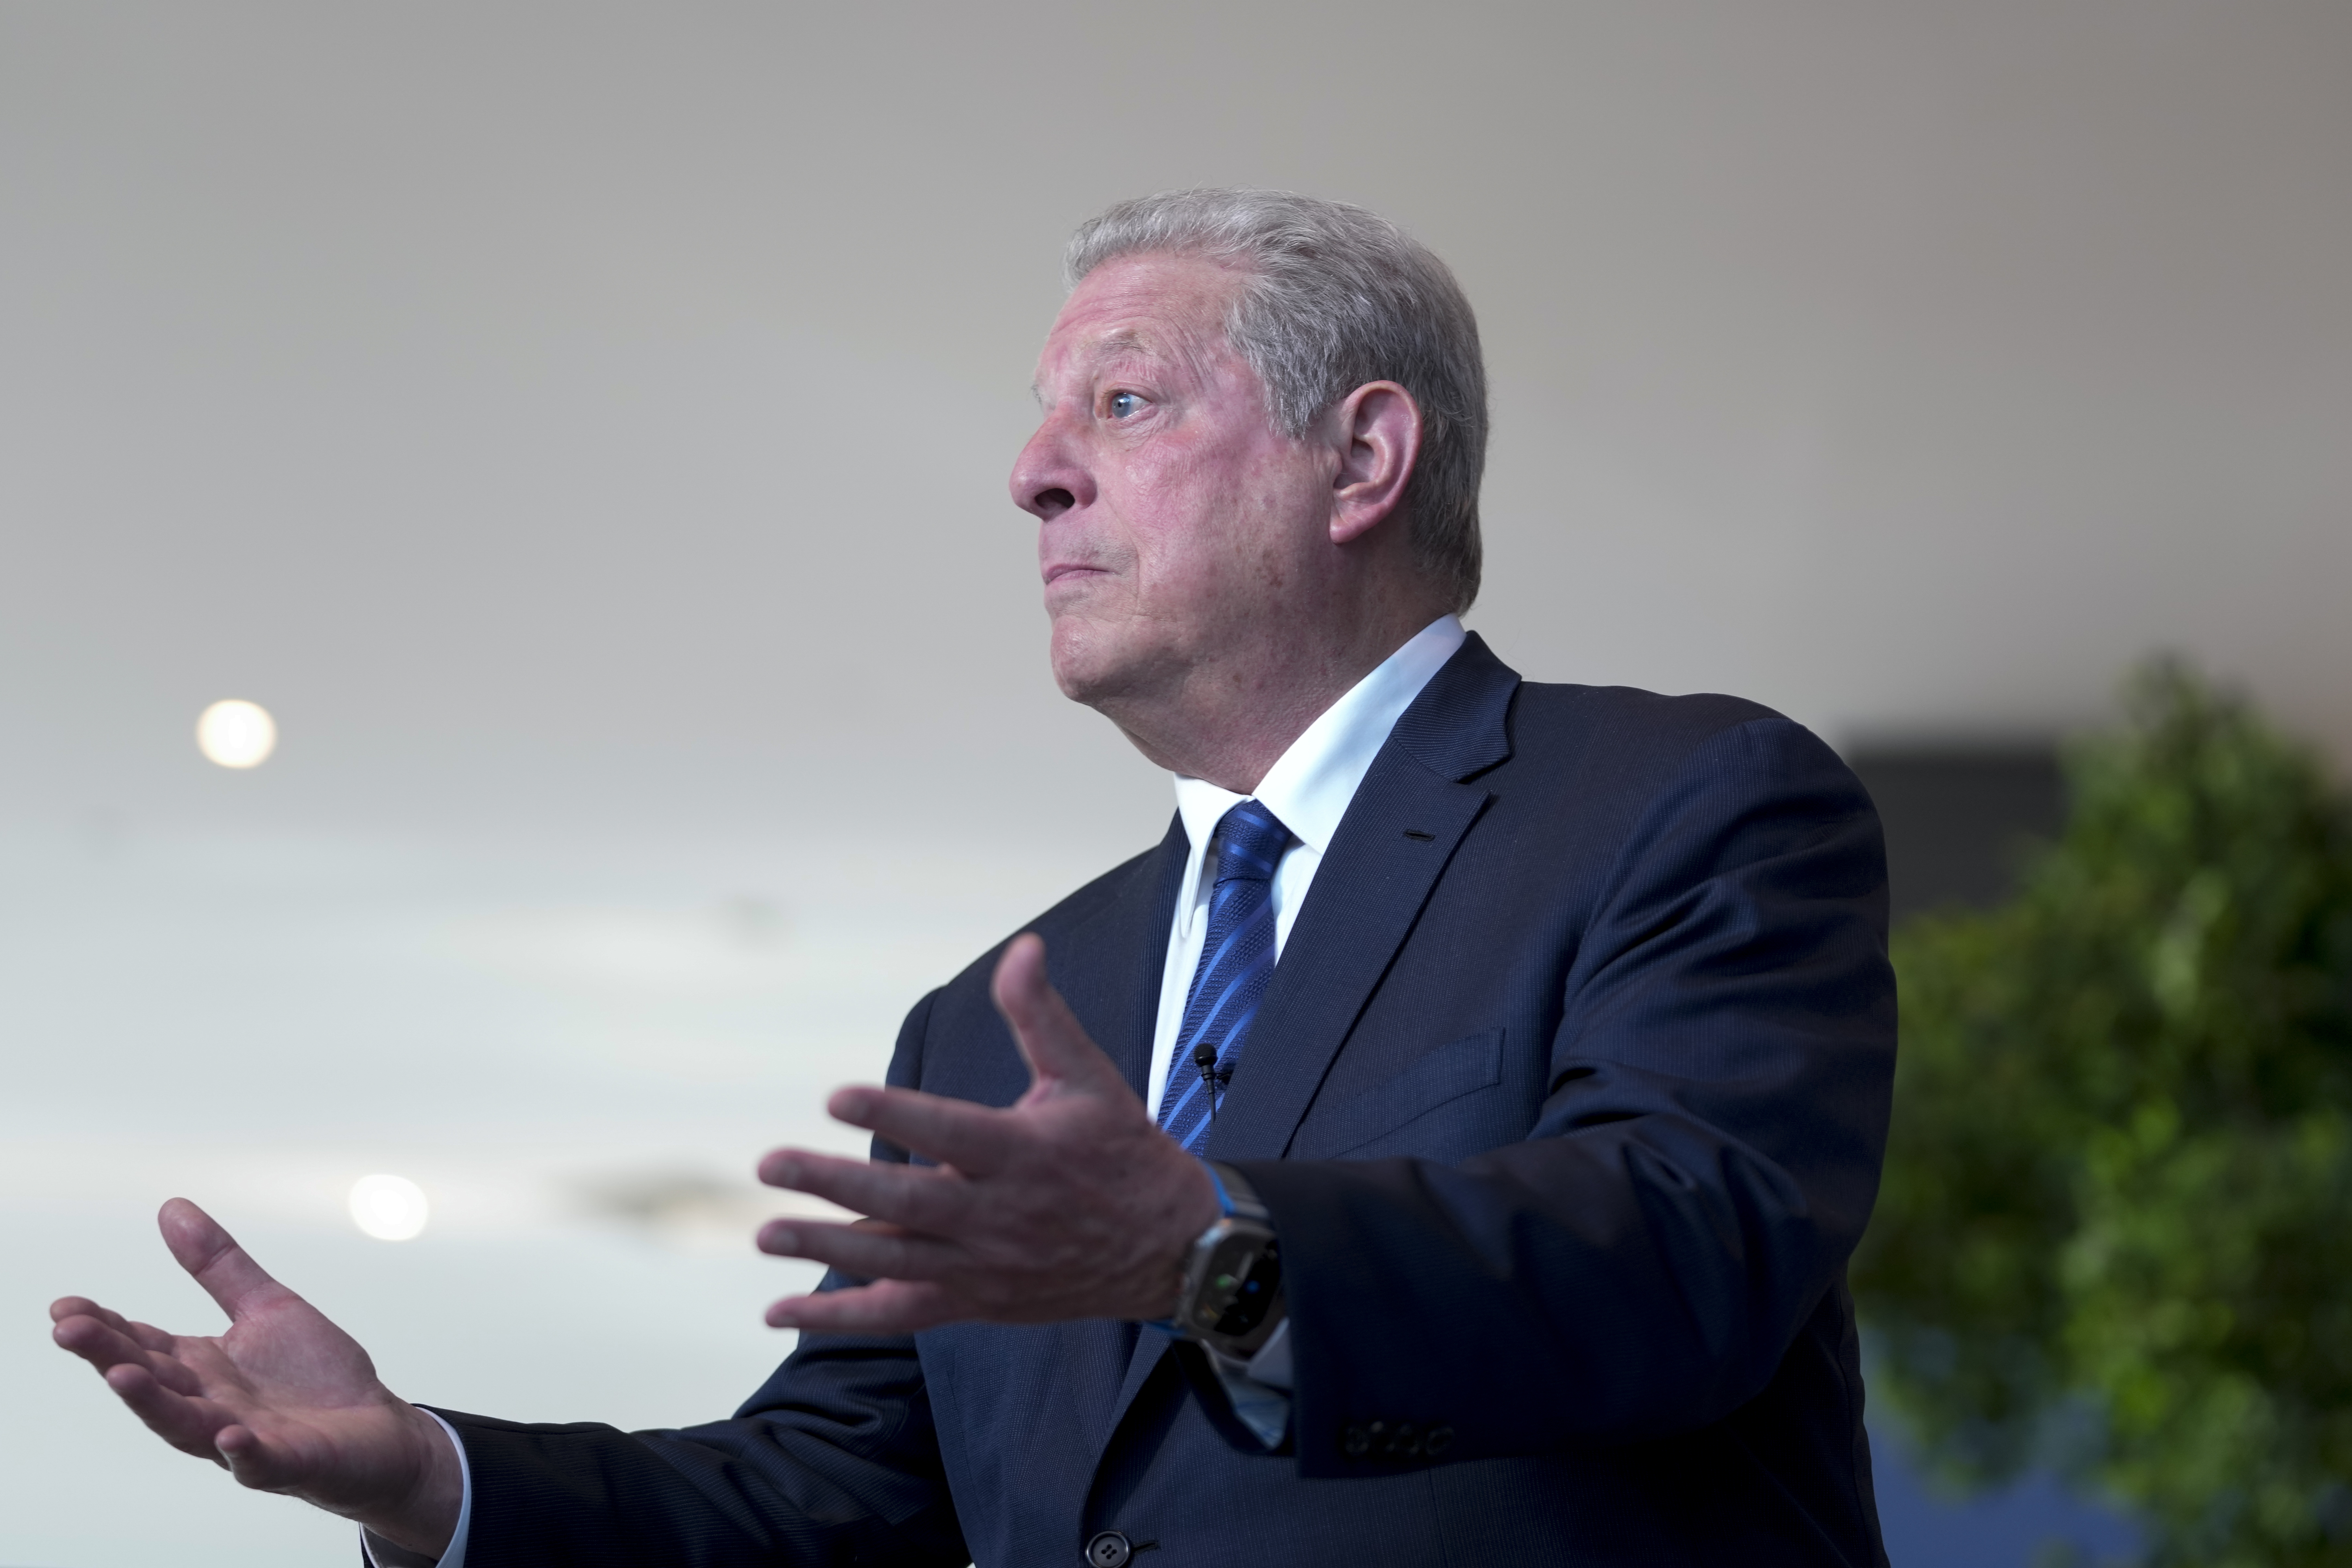 Al Gore, wearing a suit and tie, makes an open-handed, imploring gesture as he speaks during the climate summit.